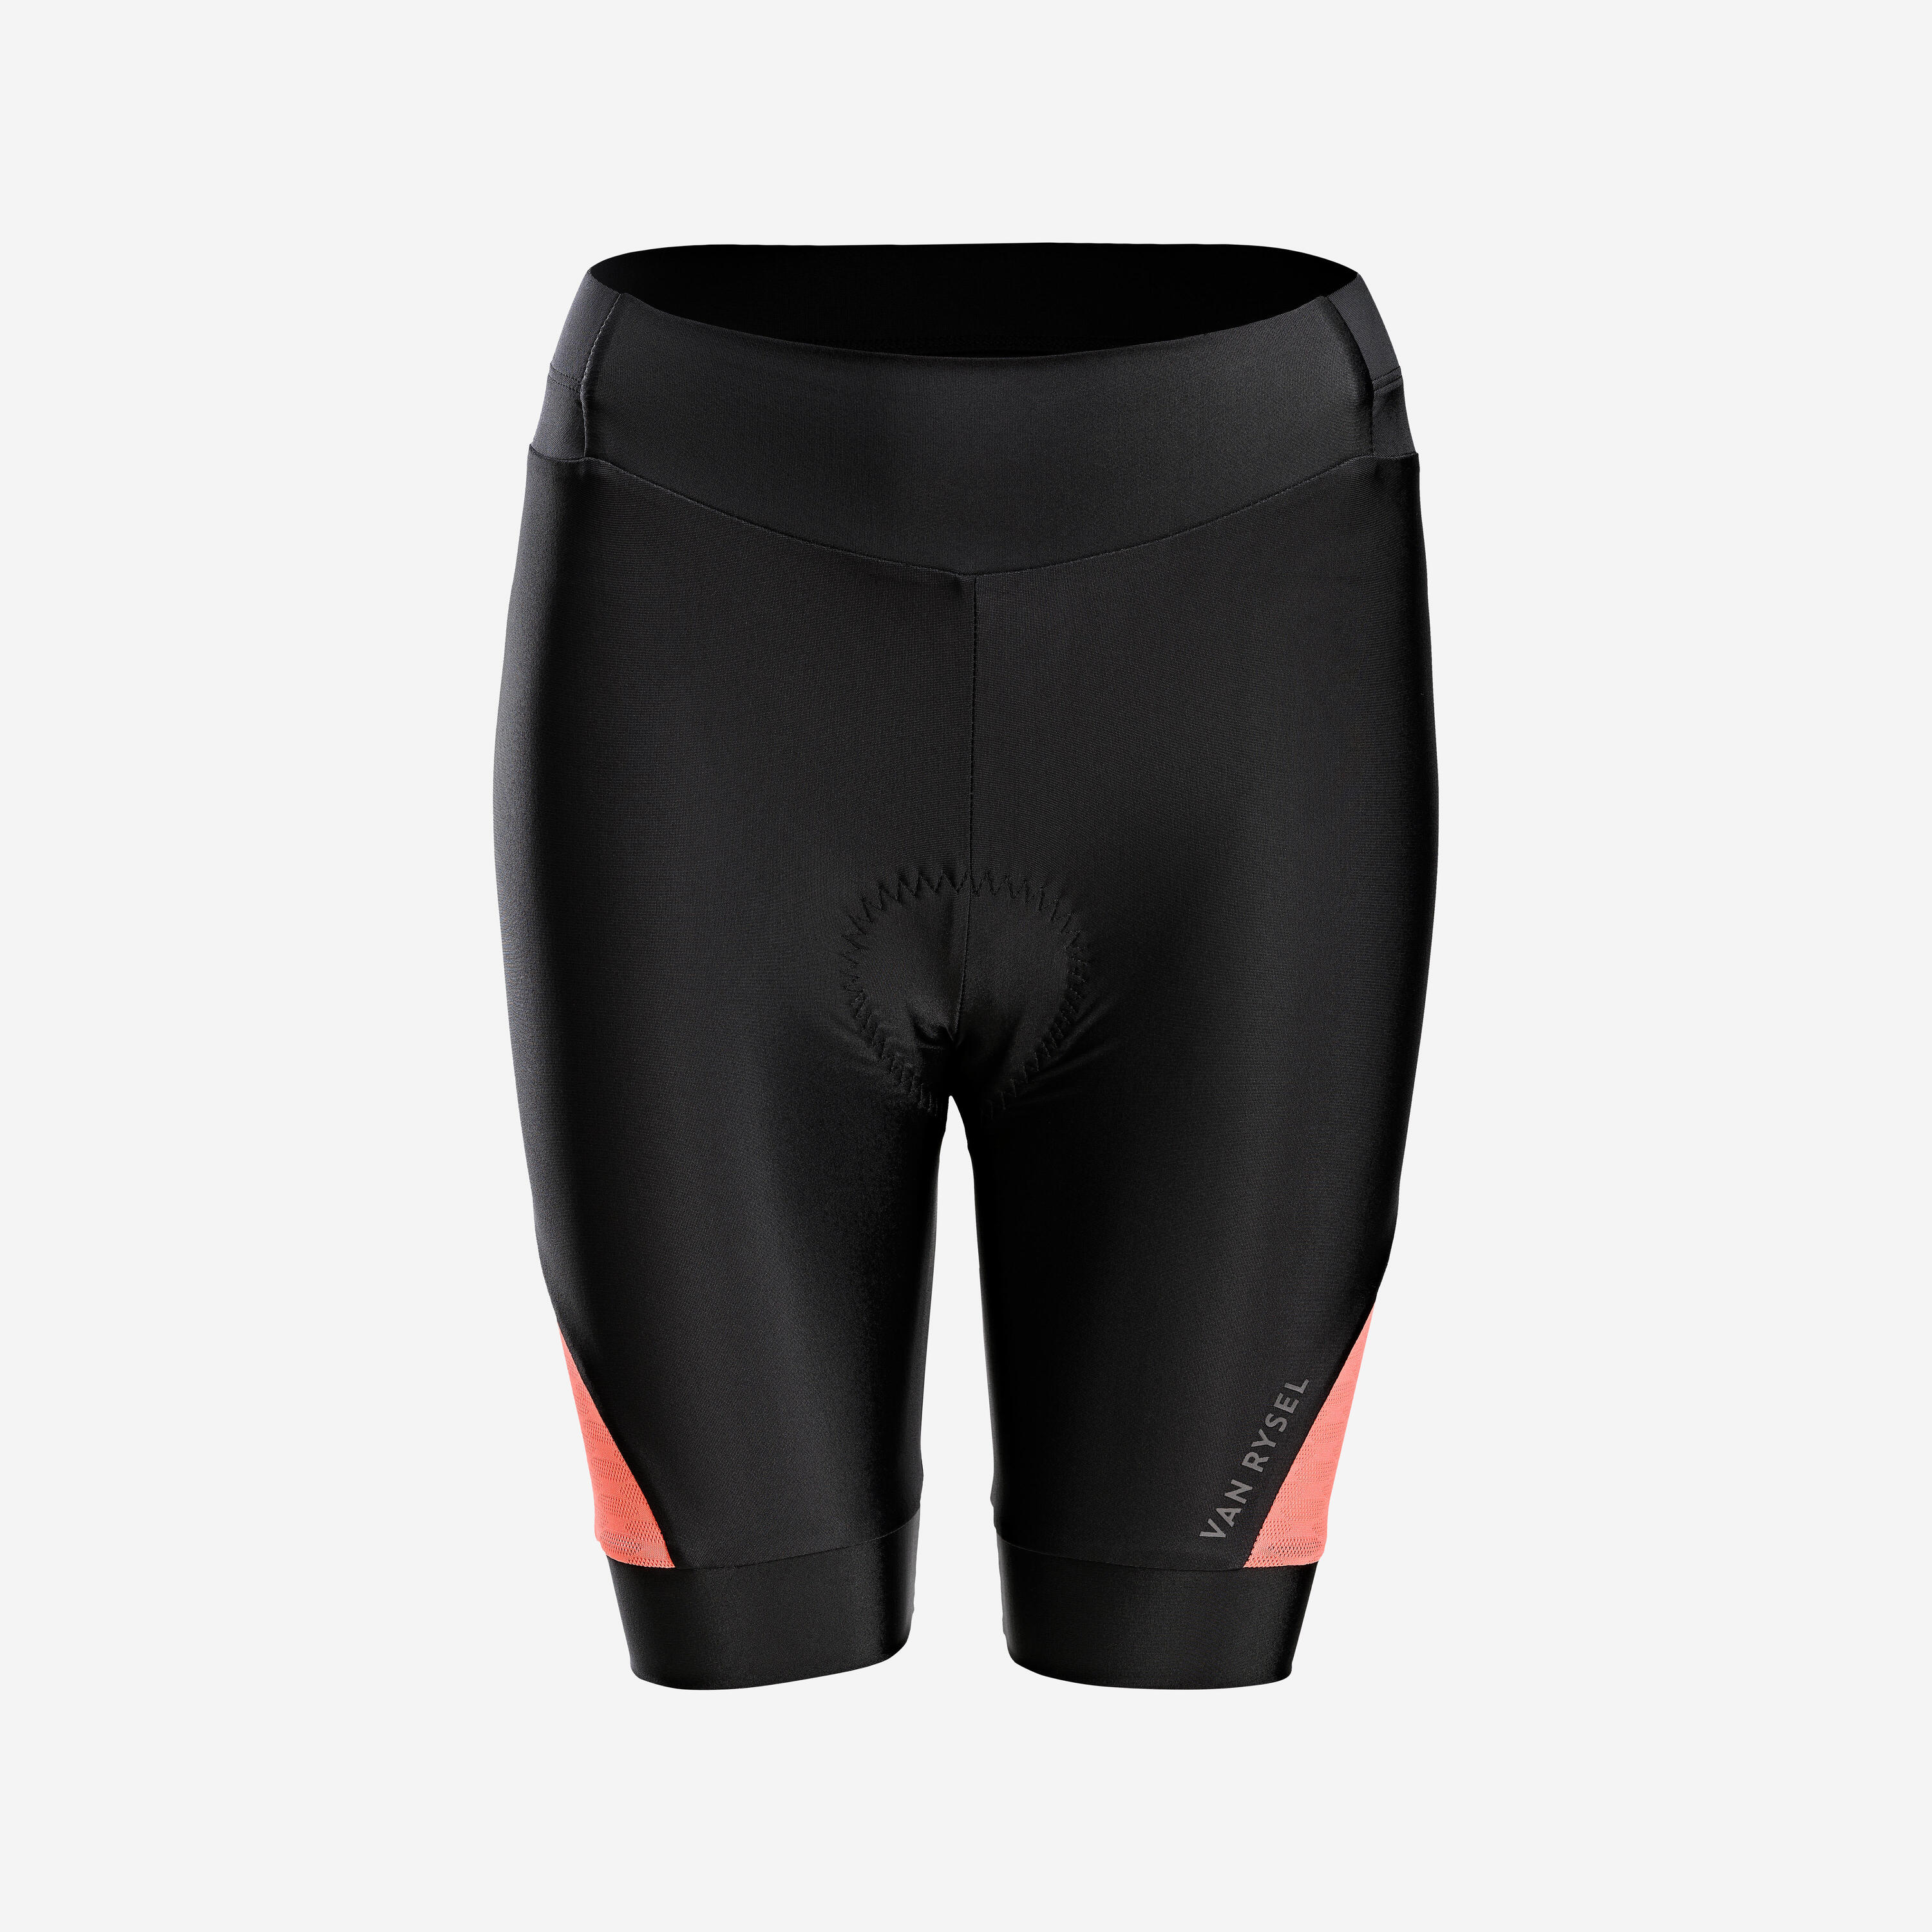 VAN RYSEL Women's Strapless Summer Road Cycle Shorts Discover - Black/Coral